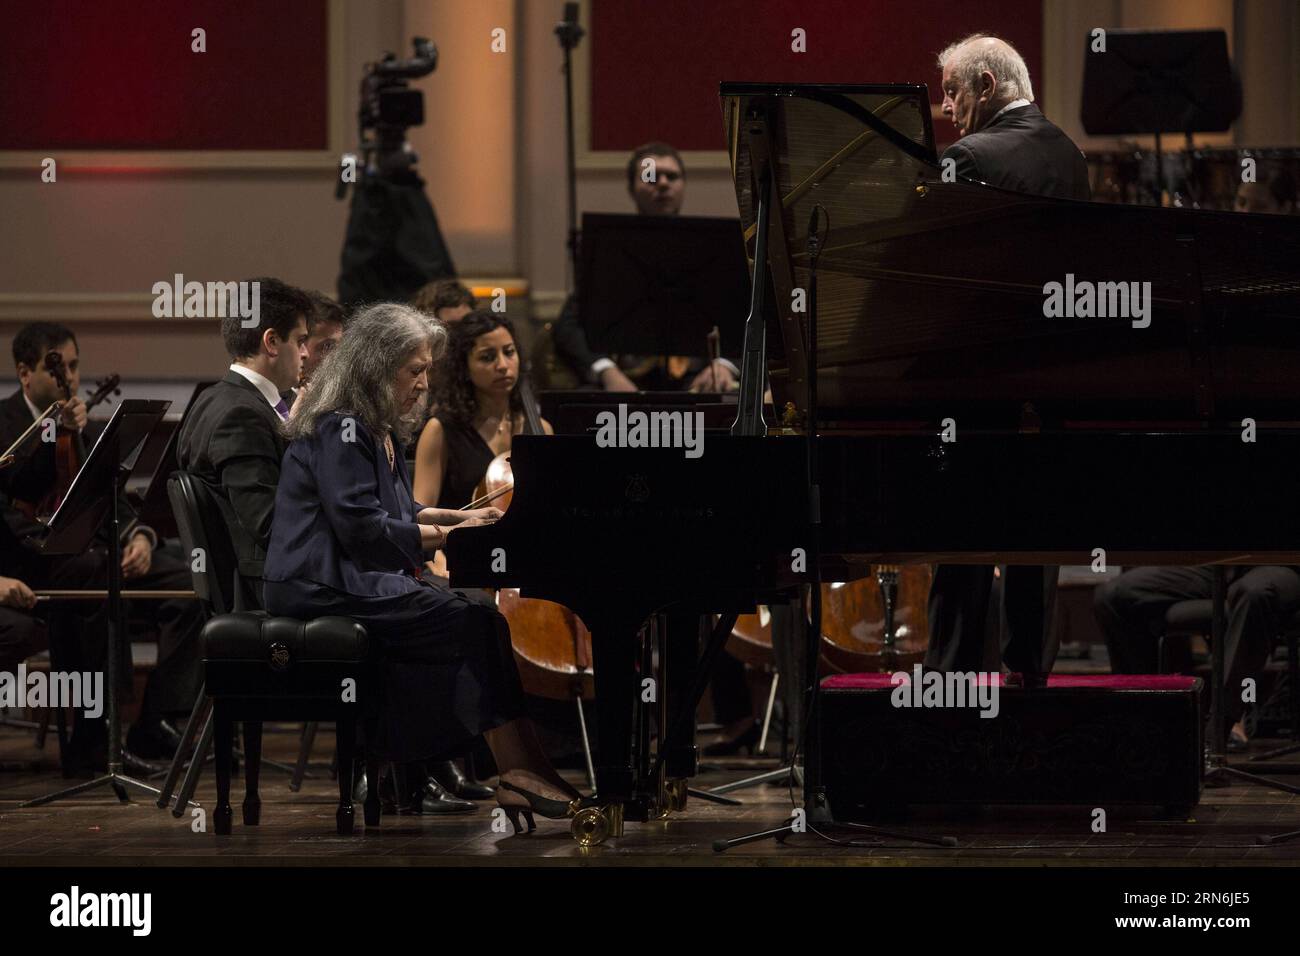 BUENOS AIRES, July 29, 2015 -- Argentinean musician and orchestra conductor Daniel Barenboim (R) and pianist Martha Argerich perform at a concert held with the West-Eastern Divan Orchestra at the Colon Theater, in Buenos Aires, capital of Argentina, July 29, 2015. ) (jp) ARGENTINA-BUENOS AIRES-MUSIC-CONCERT MARTINxZABALA PUBLICATIONxNOTxINxCHN   Buenos Aires July 29 2015 Argentinean Musician and Orchestra Conductor Daniel Barenboim r and Pianist Martha Argerich perform AT a Concert Hero With The WEST Eastern Divan Orchestra AT The Colon Theatre in Buenos Aires Capital of Argentina July 29 2015 Stock Photo